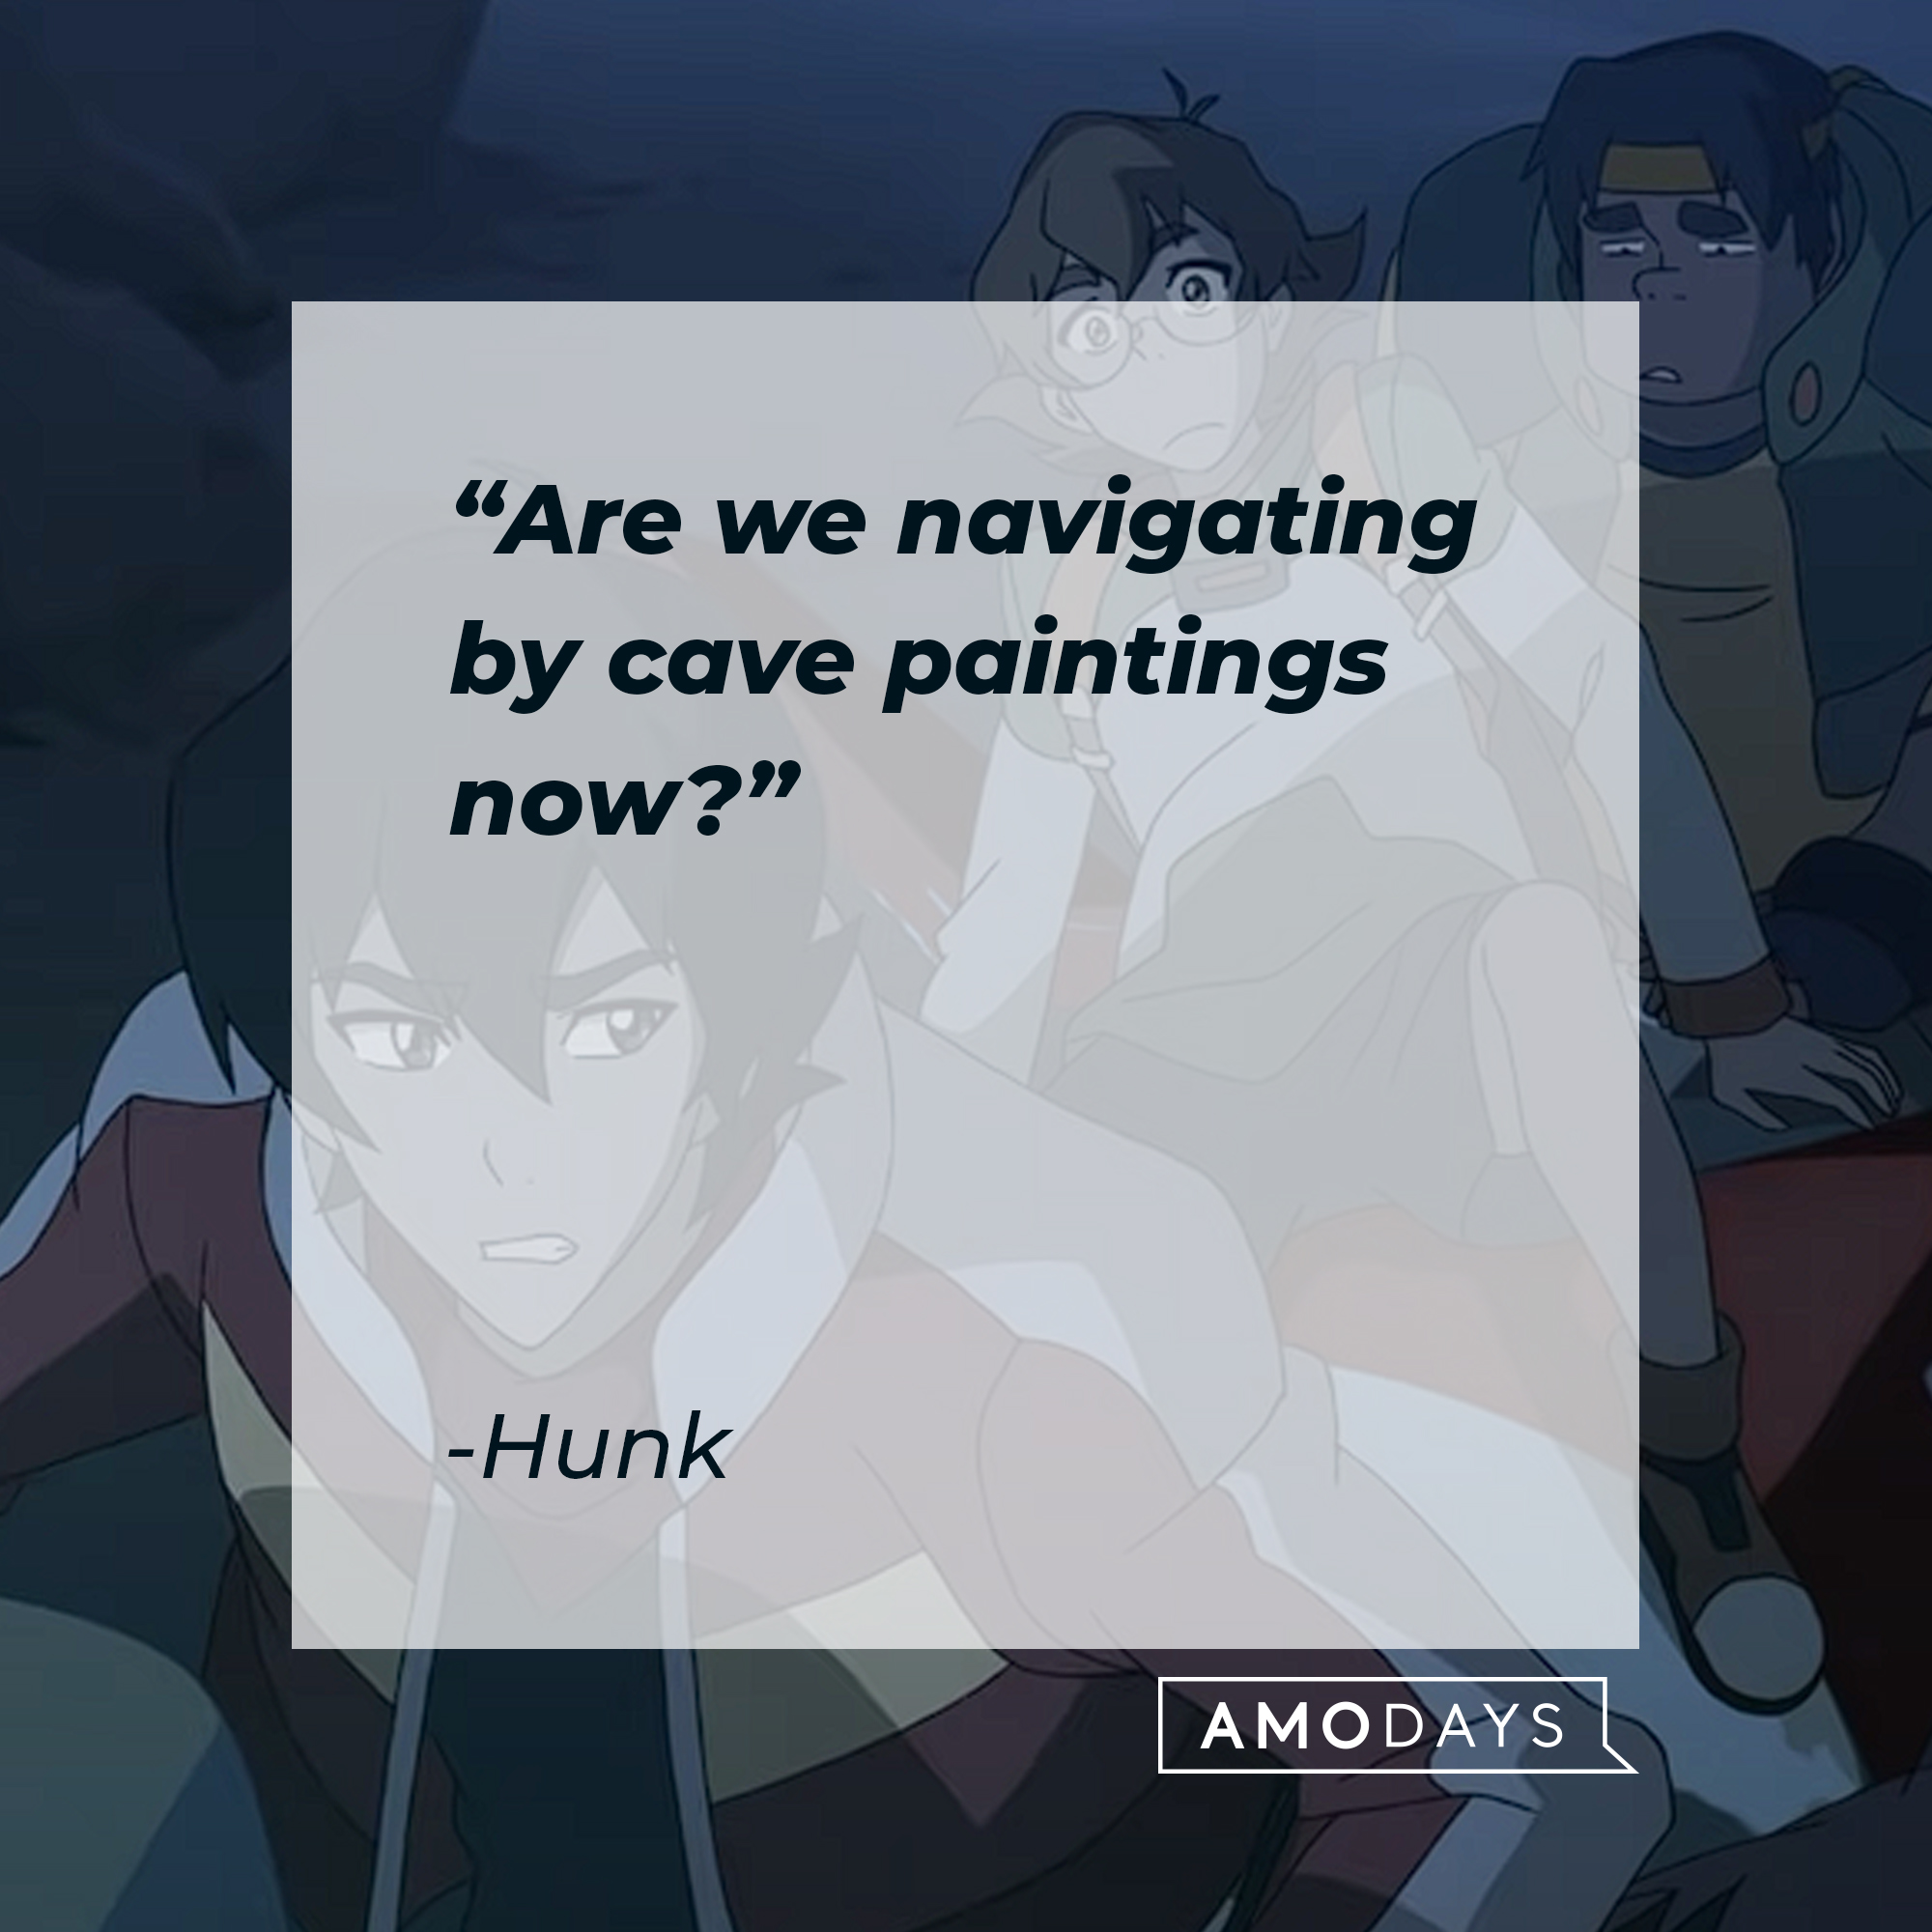 Hunk's quote: "Are we navigating by cave paintings now?" | Source: youtube.com/netflixafterschool